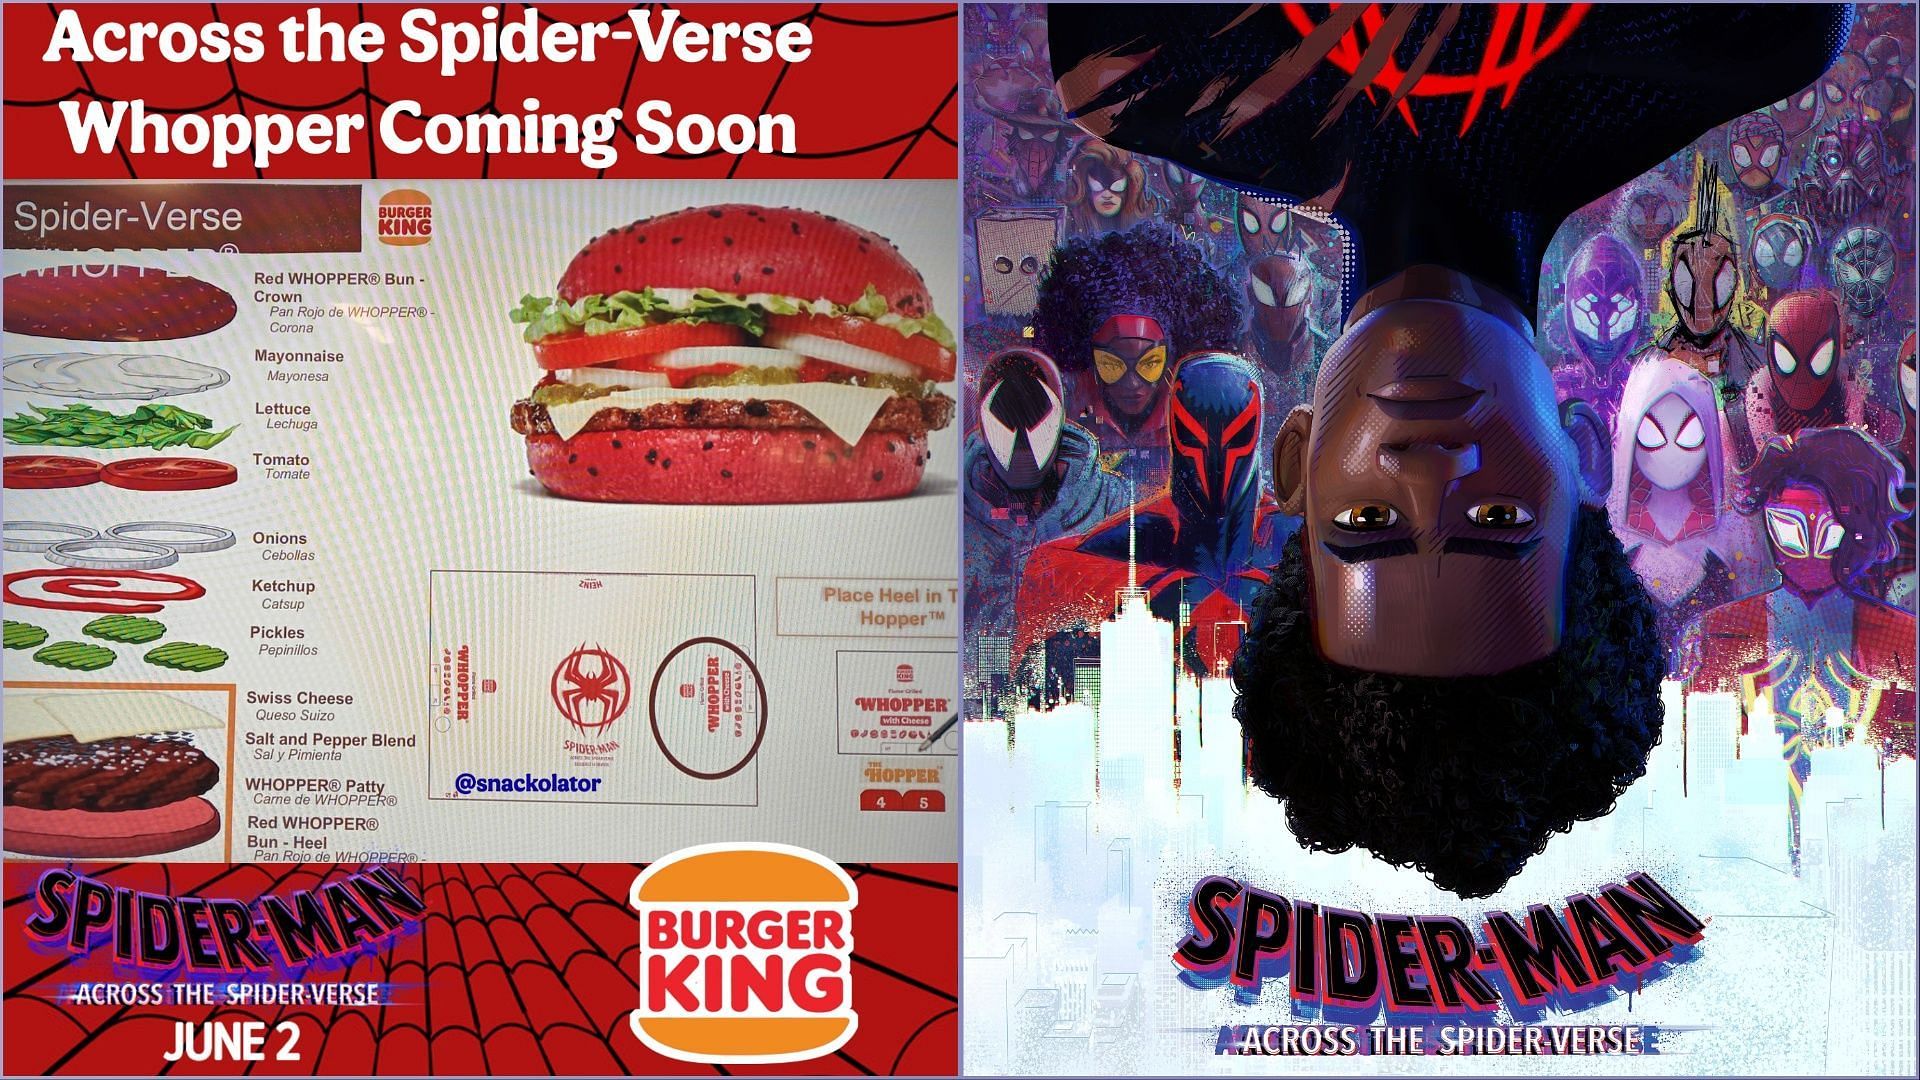 The burger chain is commemorating the upcoming release of Spider-Man: Across the Spider-Verse (Image via Sony Pictures, @snackolator/Twitter)